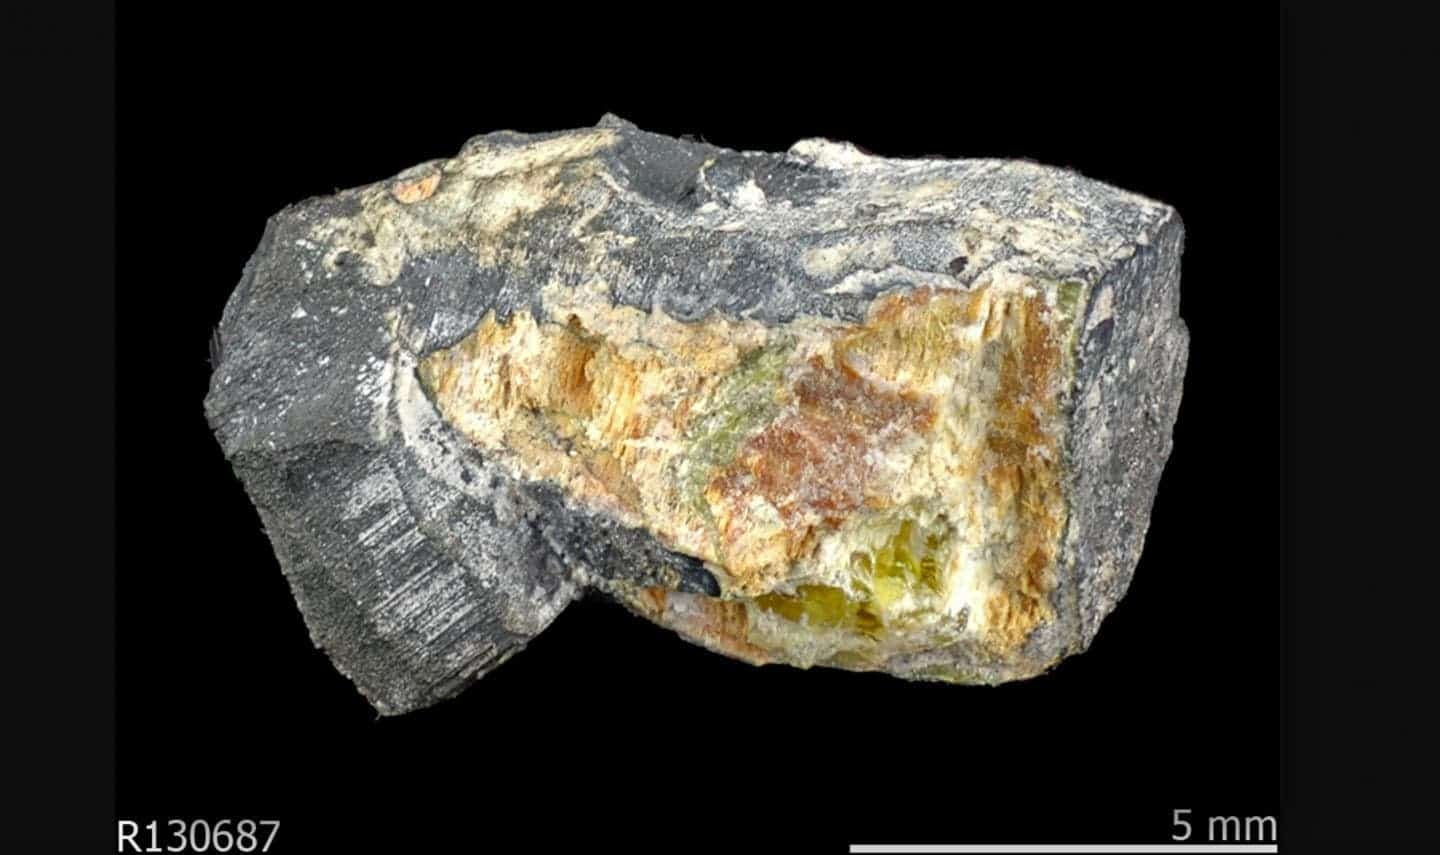 Parisite-(La) is a newly discovered mineral species that was predicted by big data analysis. It was discovered in Brazil's northeast state of Bahia. Credit: Luiz Menezes.